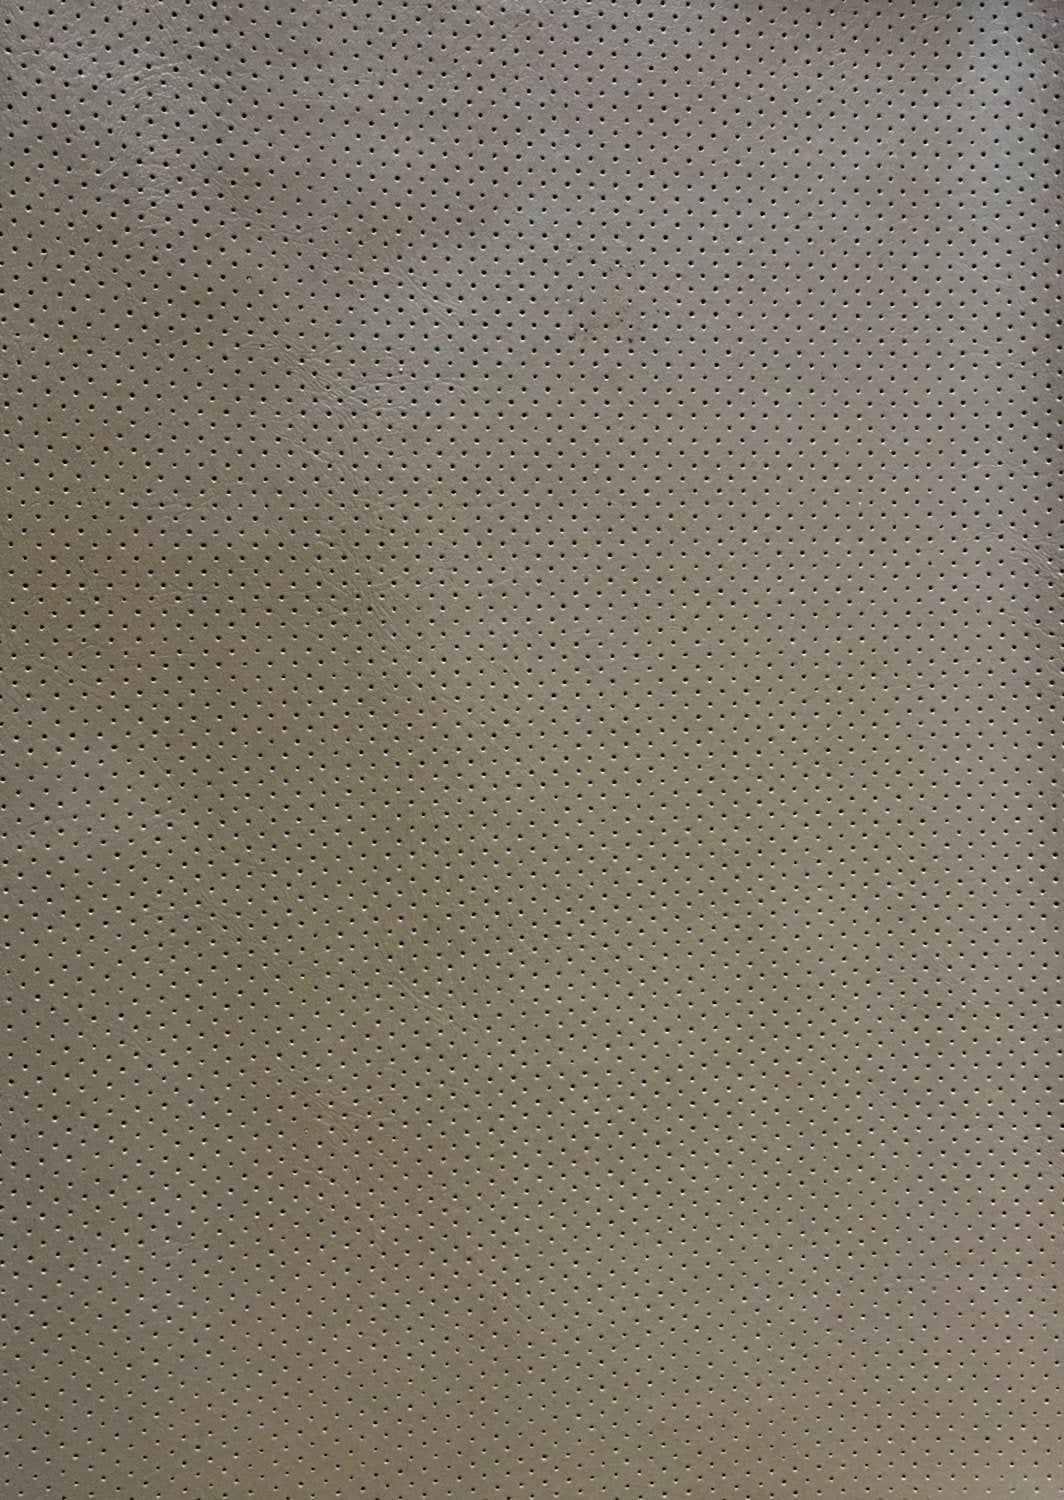 meduim-parchment-perforated-faux-leather-vinyl-55-wide-marine-grade-upholstery-fabric-by-the-yard